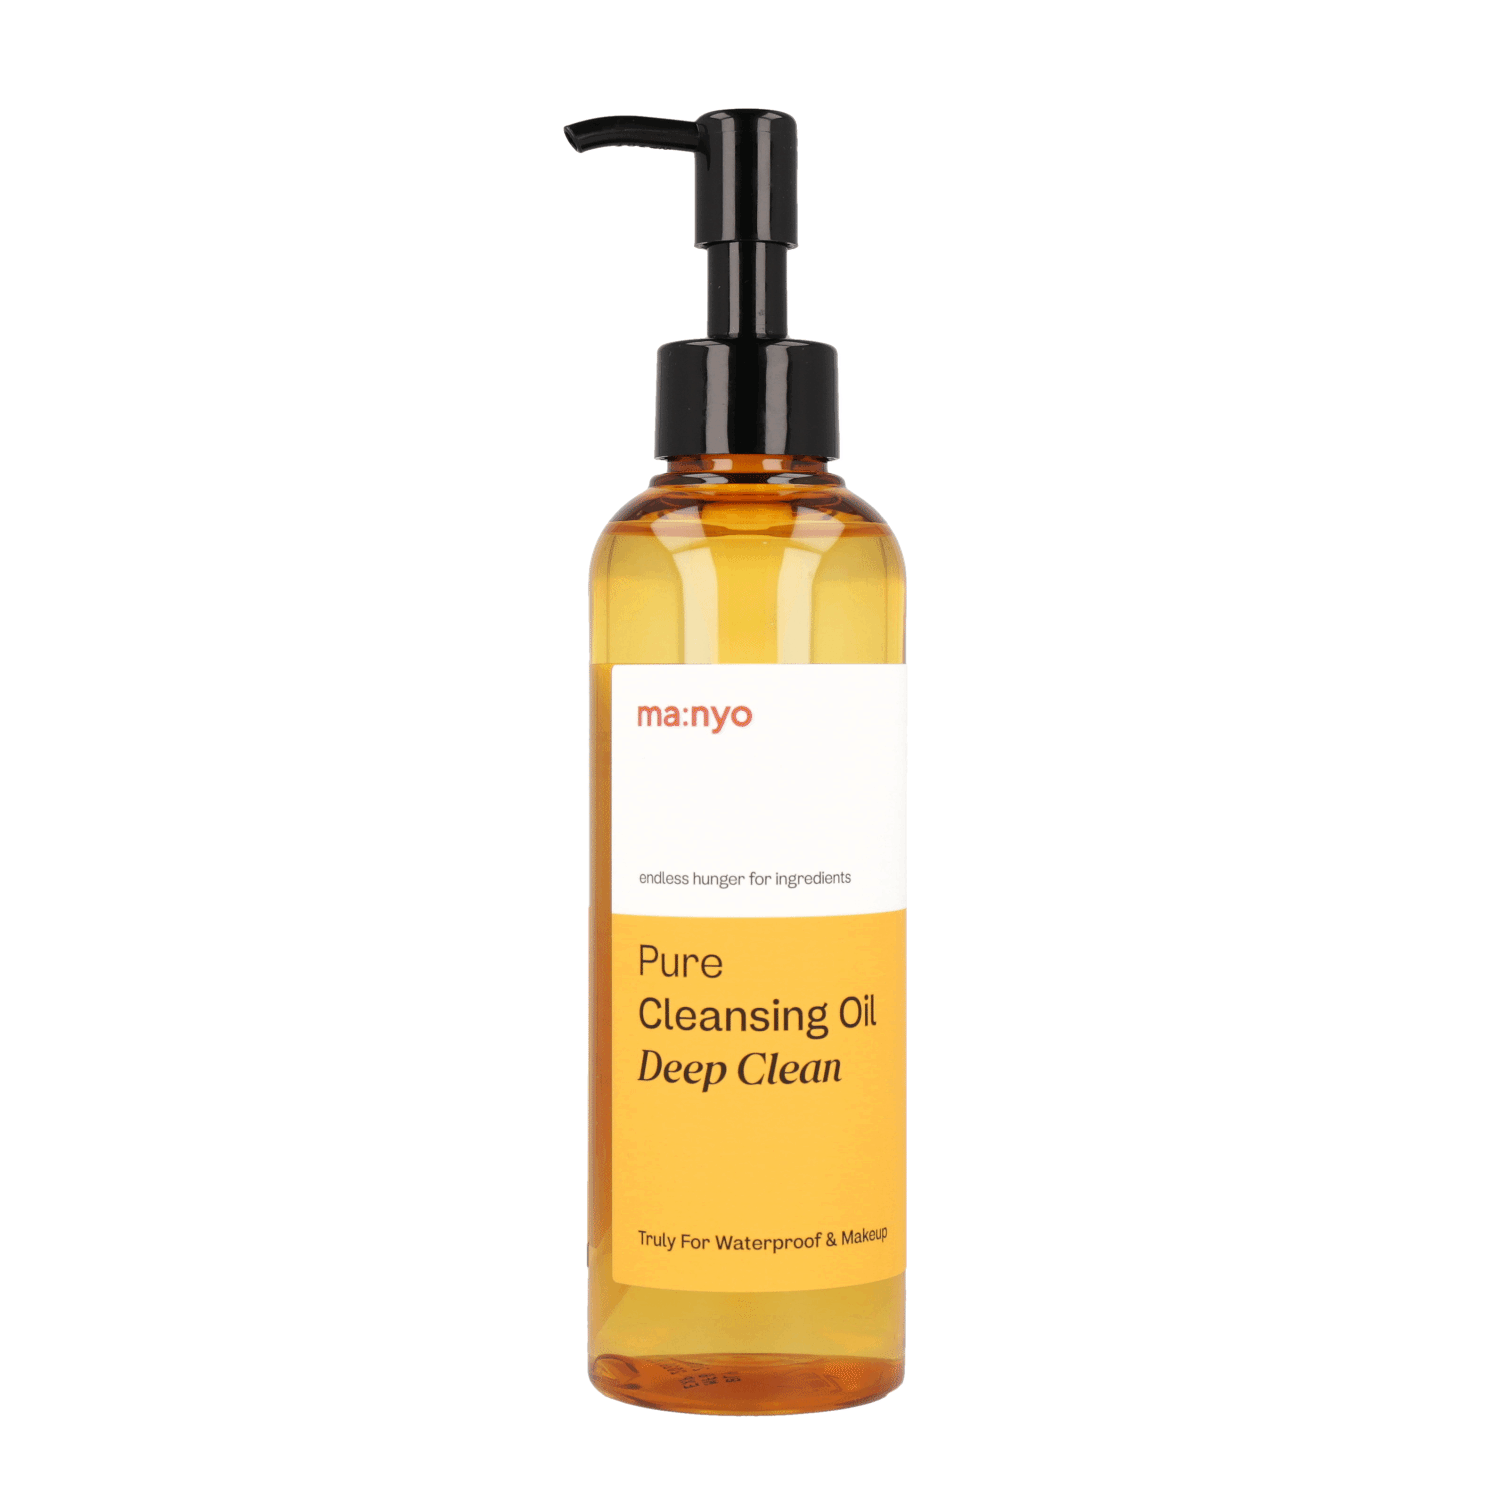 MANYO FACTORY Pure Cleansing Oil Deep Clean 200ml - DODOSKIN